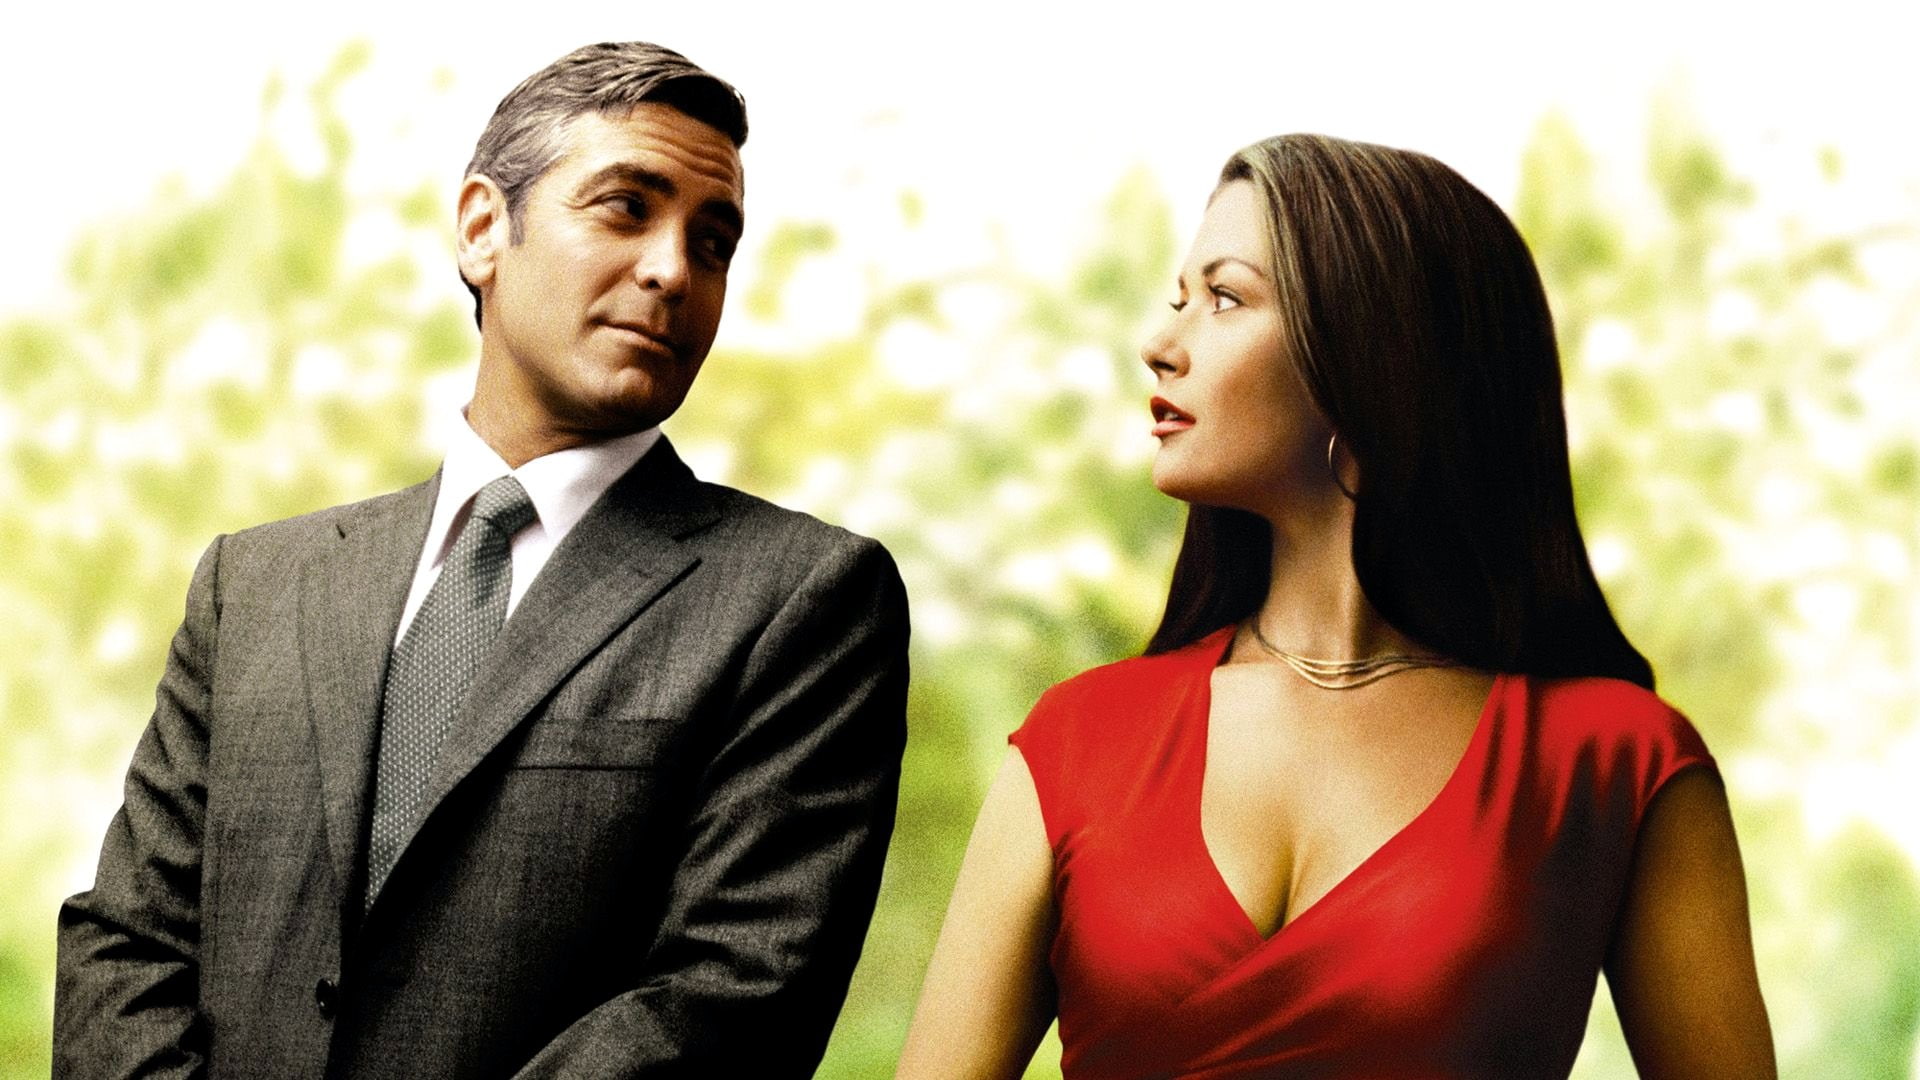 HD Wallpaper Intolerable Cruelty Two People Suit Business